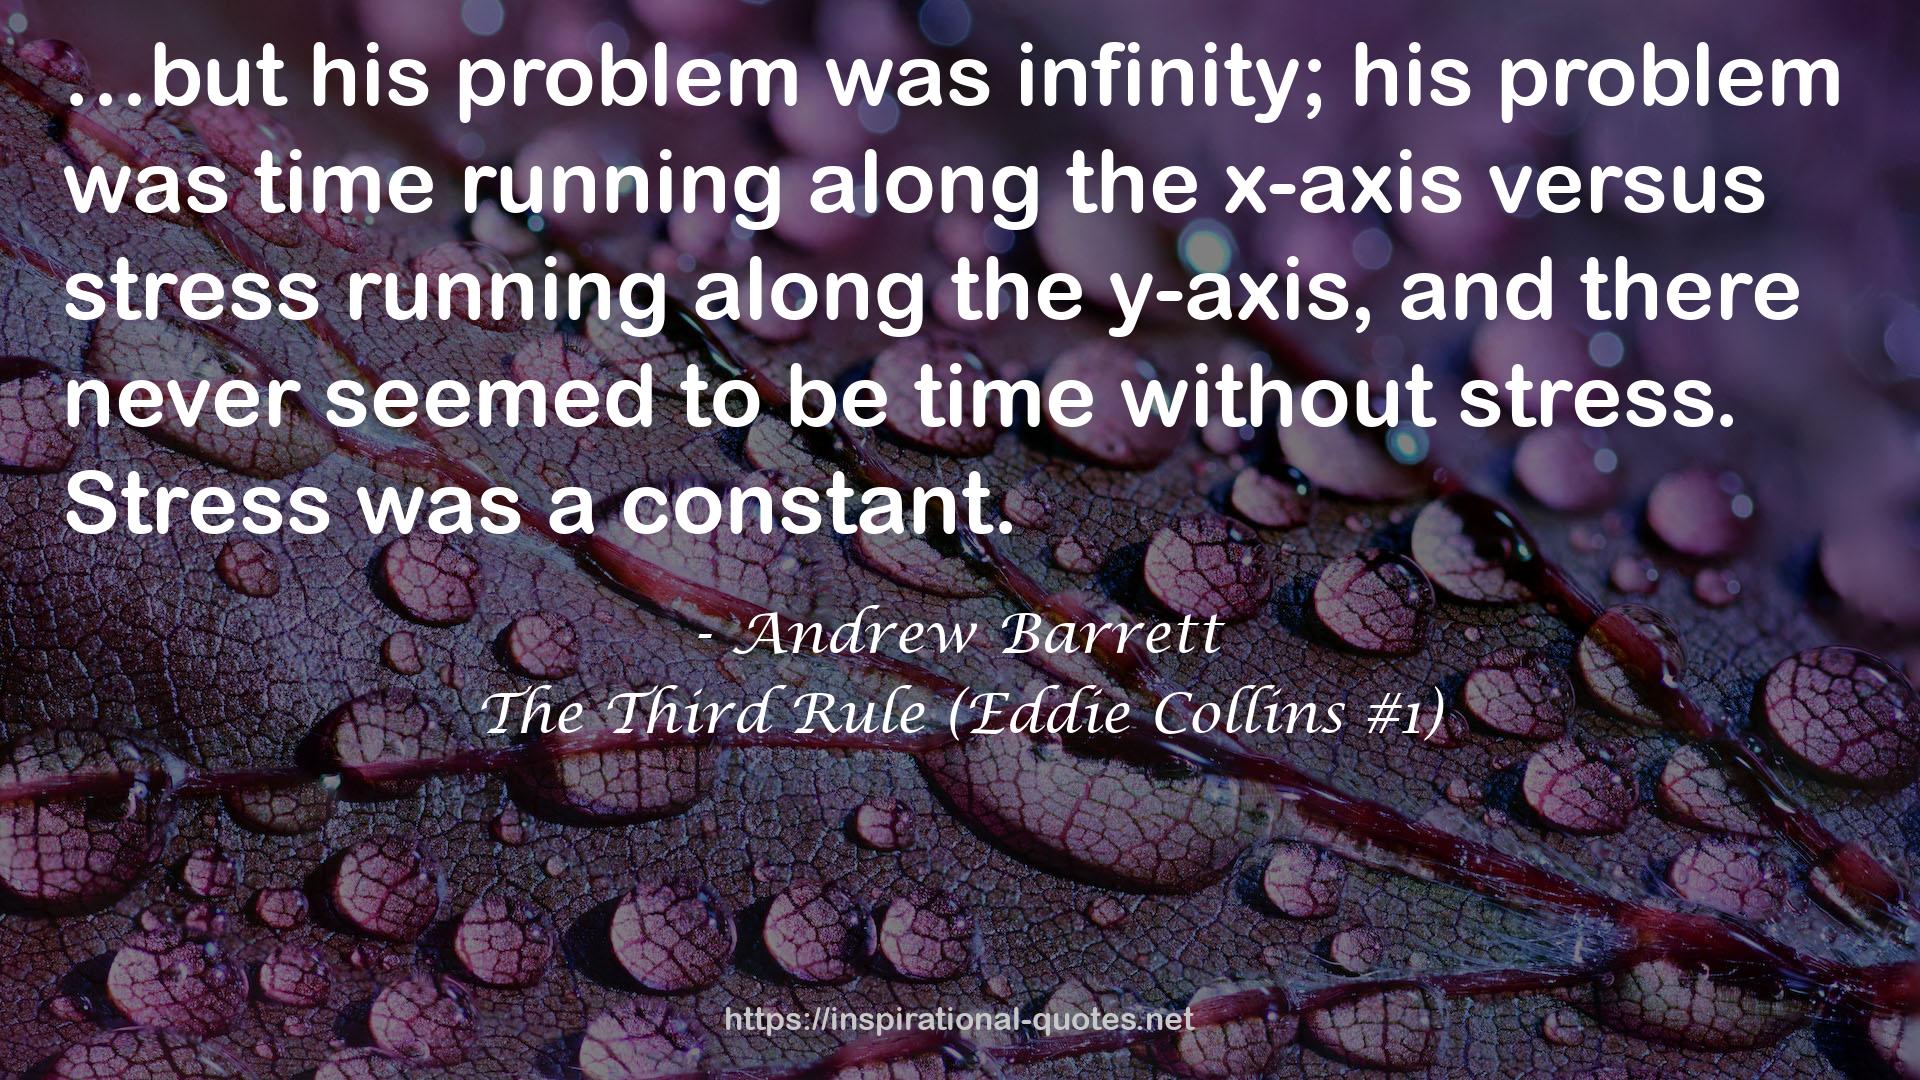 The Third Rule (Eddie Collins #1) QUOTES